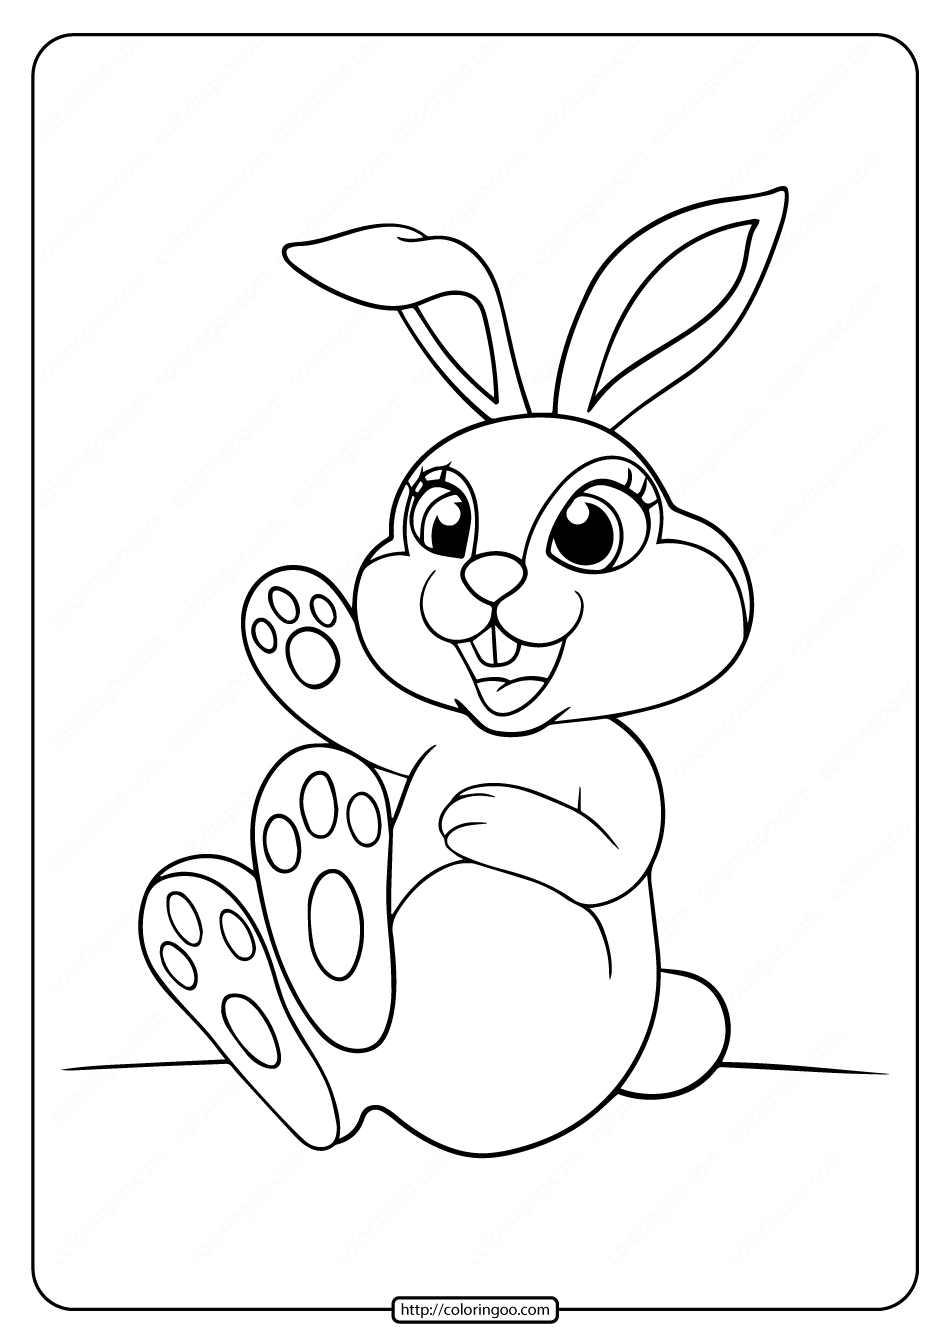 hello rabbit coloring page for kids